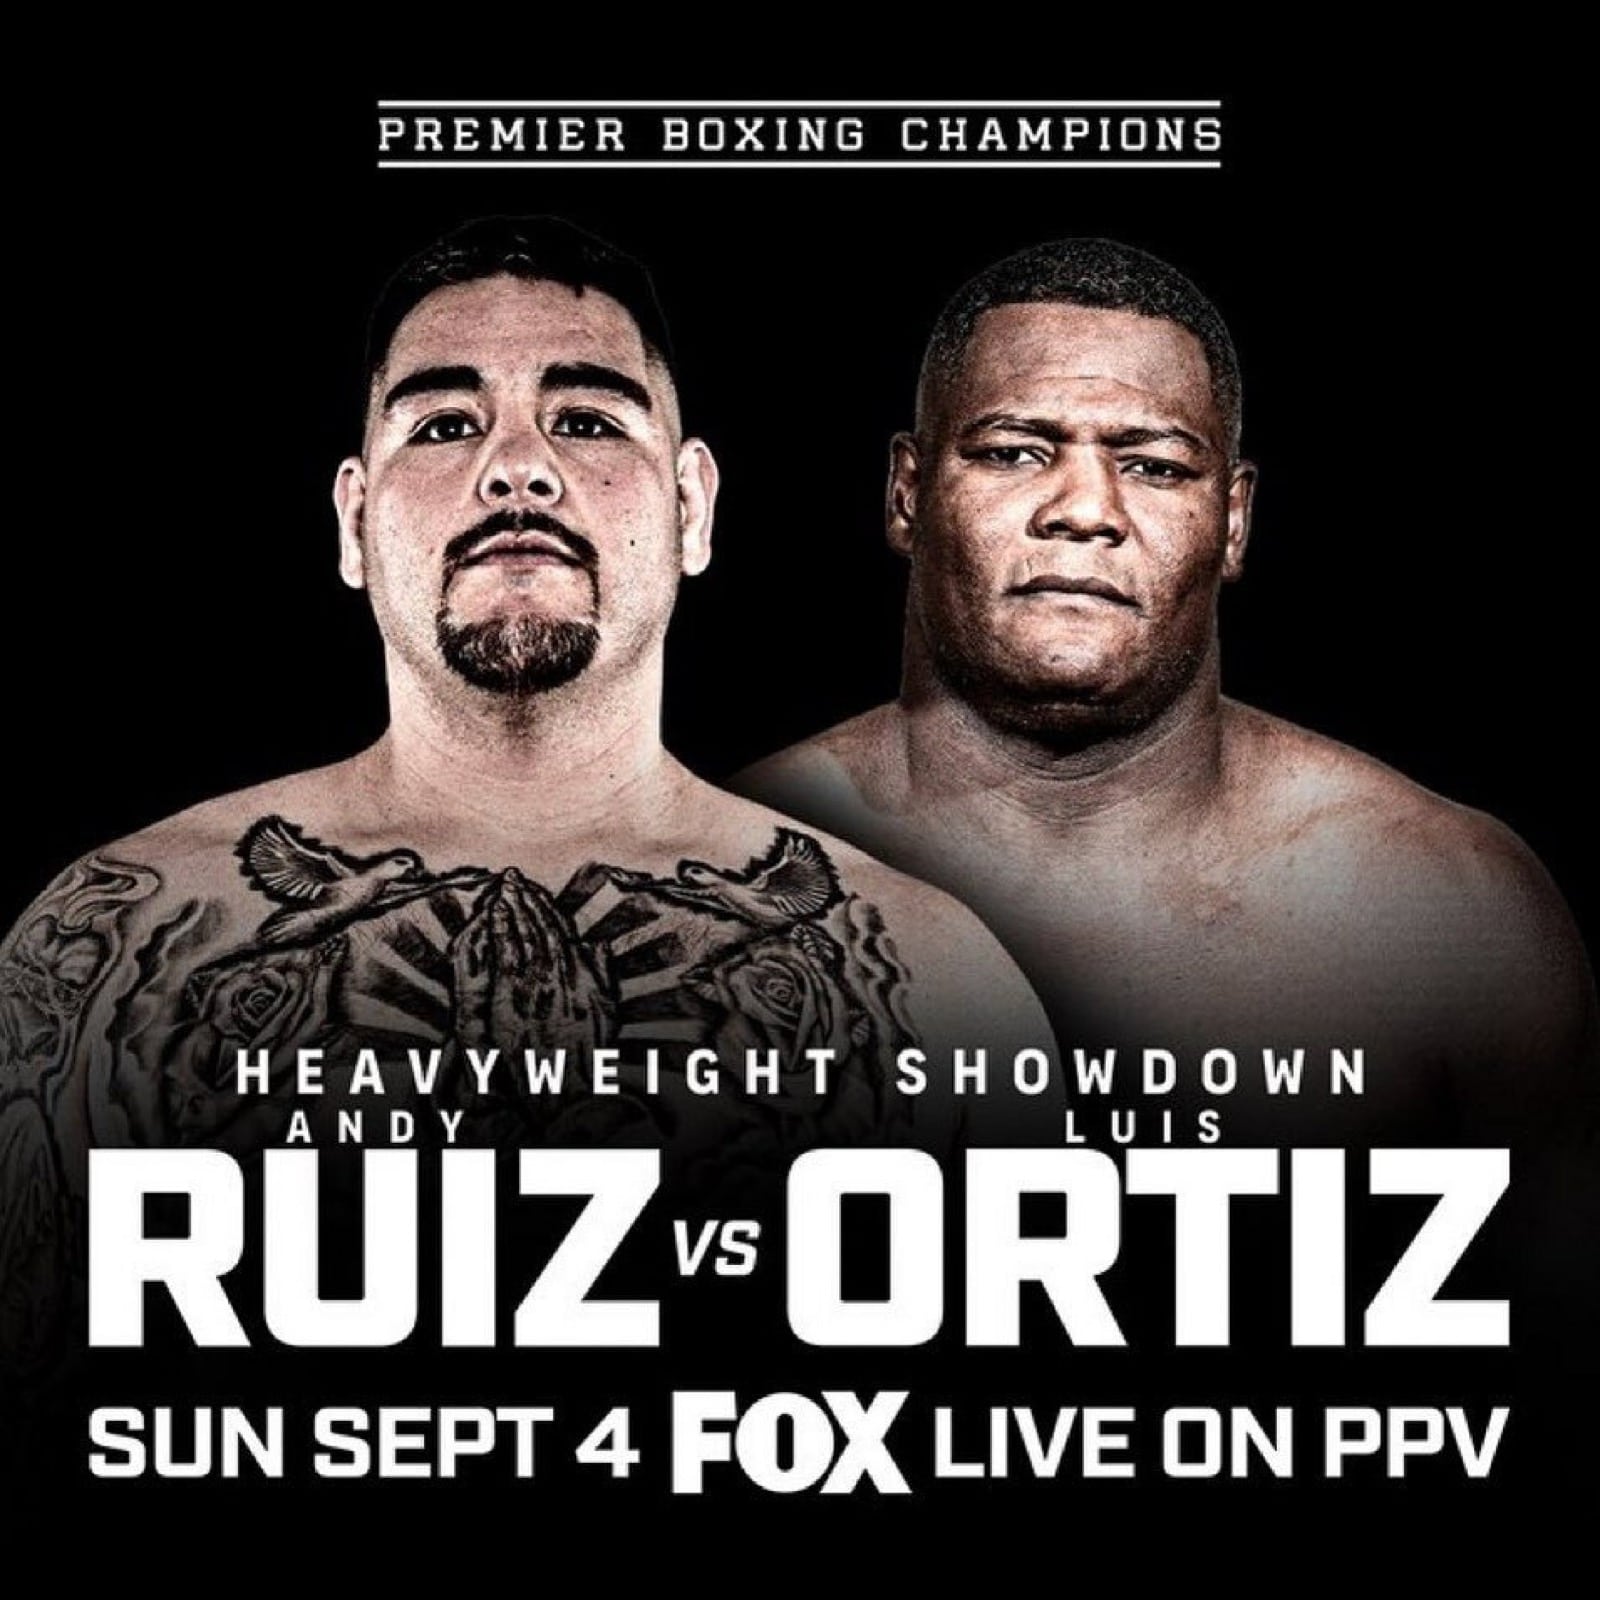 Image: Luis Ortiz - Andy Ruiz in Sept 4th on FOX pay-per-view in Los Angeles